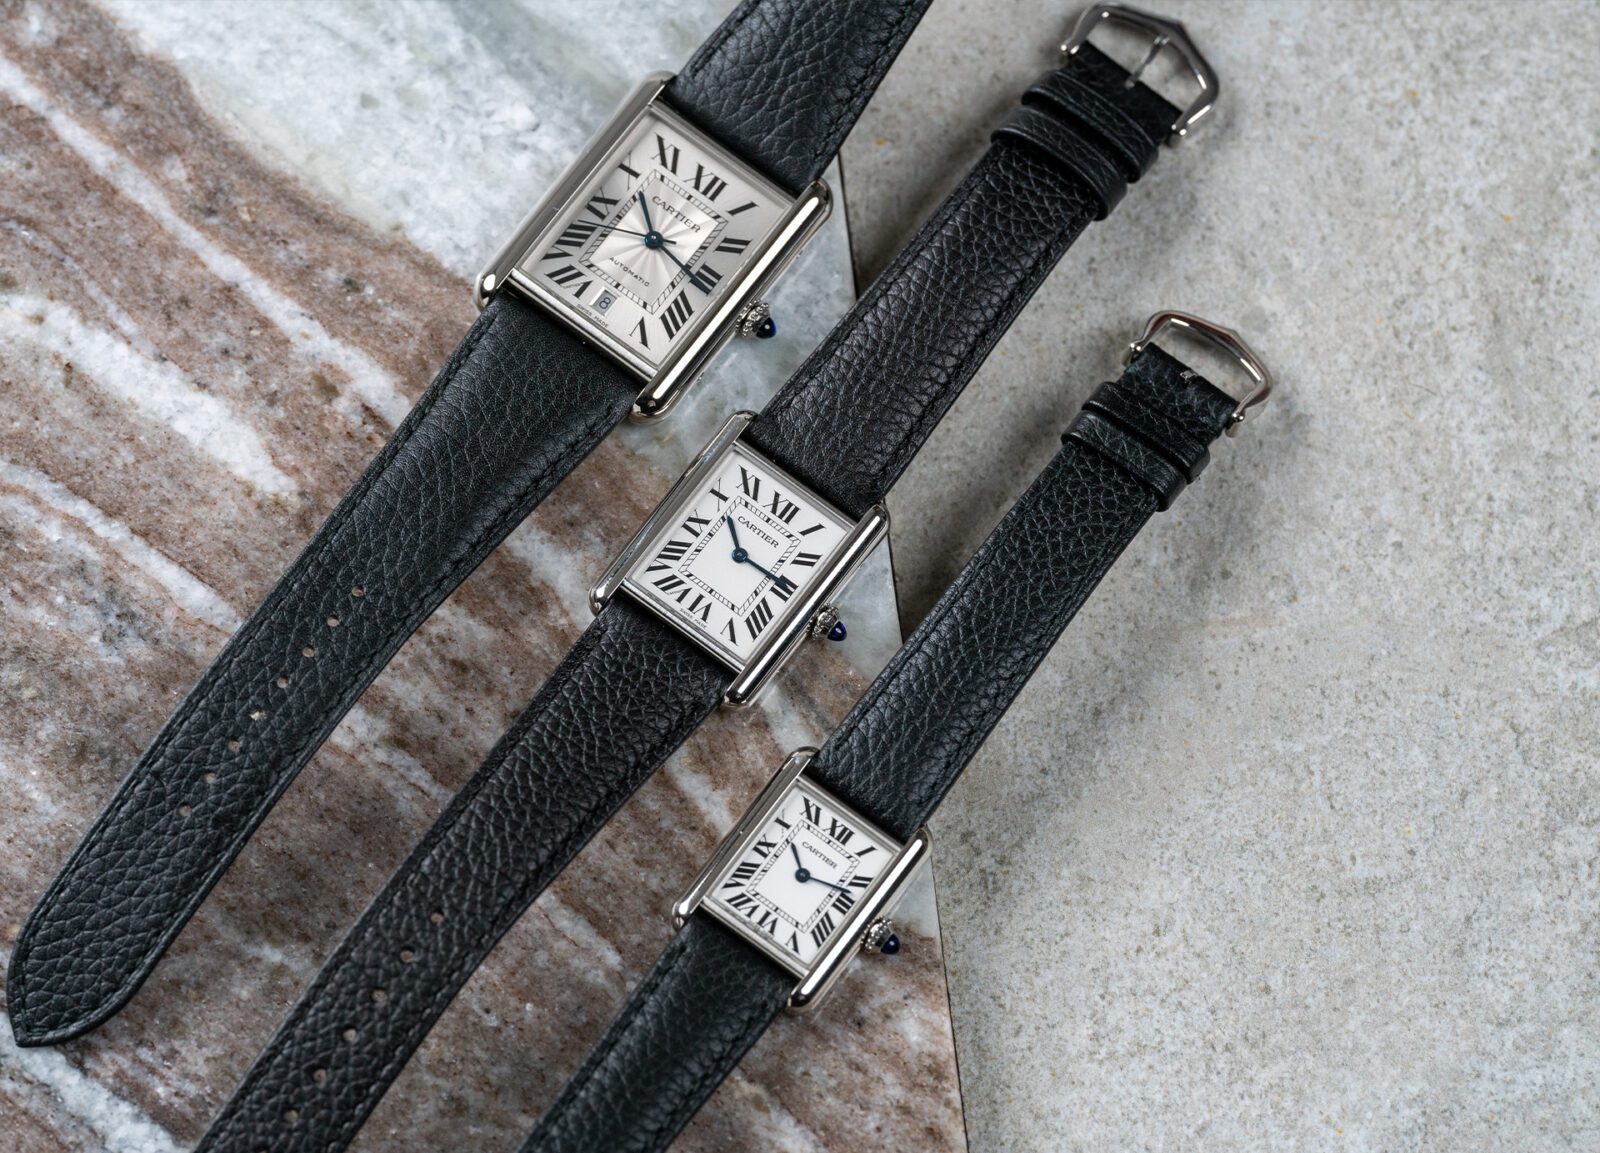 History Of The Cartier Tank Must